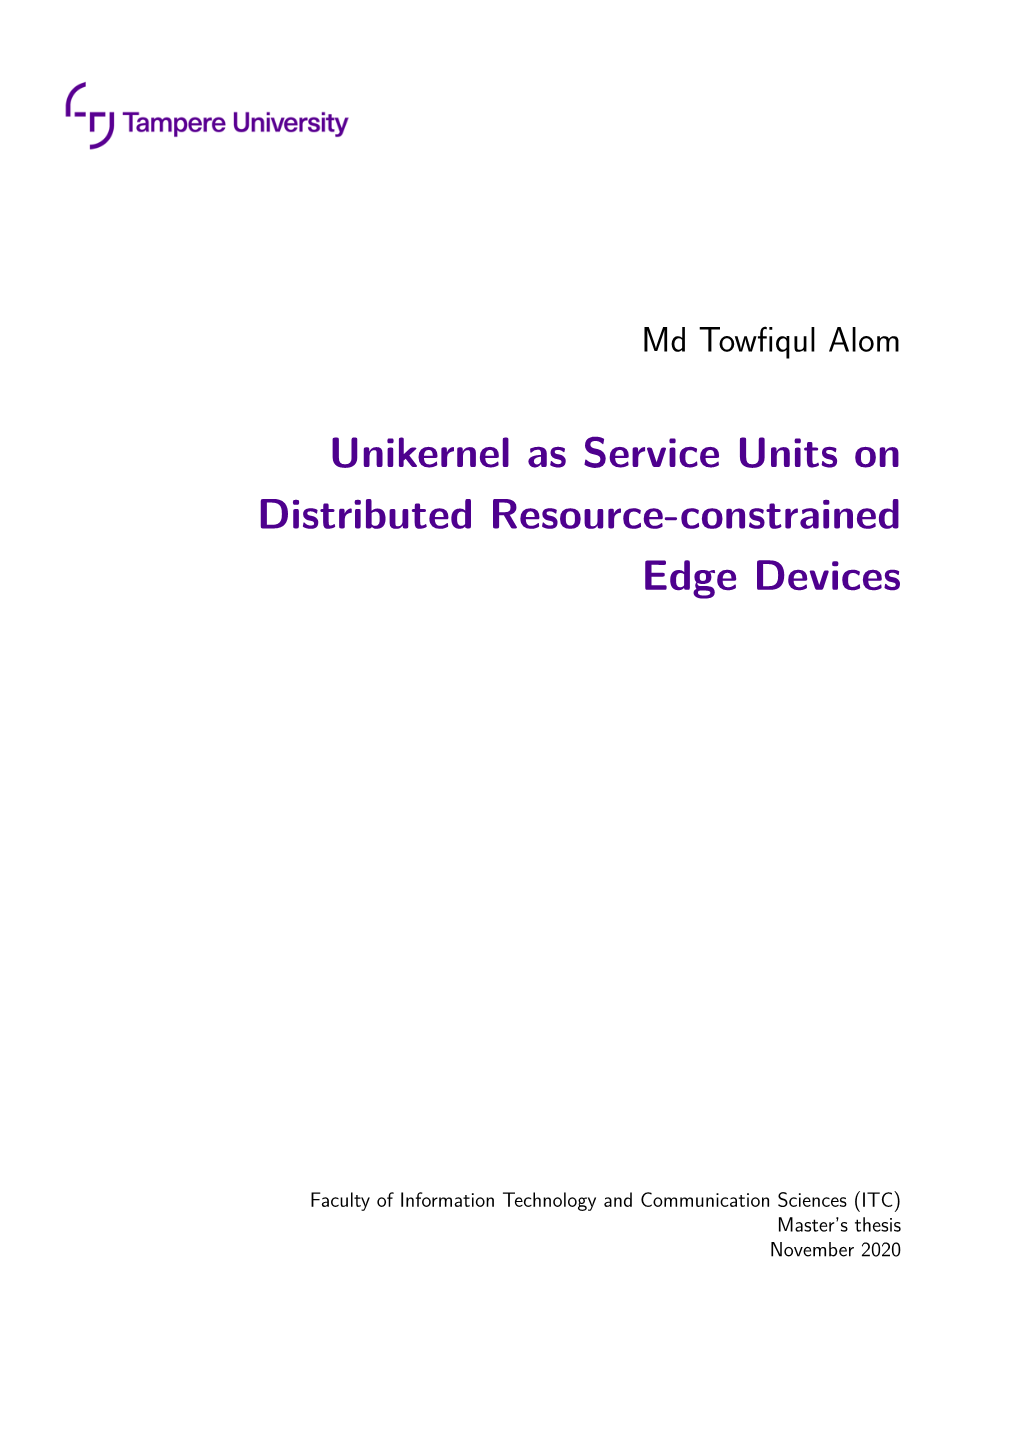 Unikernel As Service Units on Distributed Resource-Constrained Edge Devices